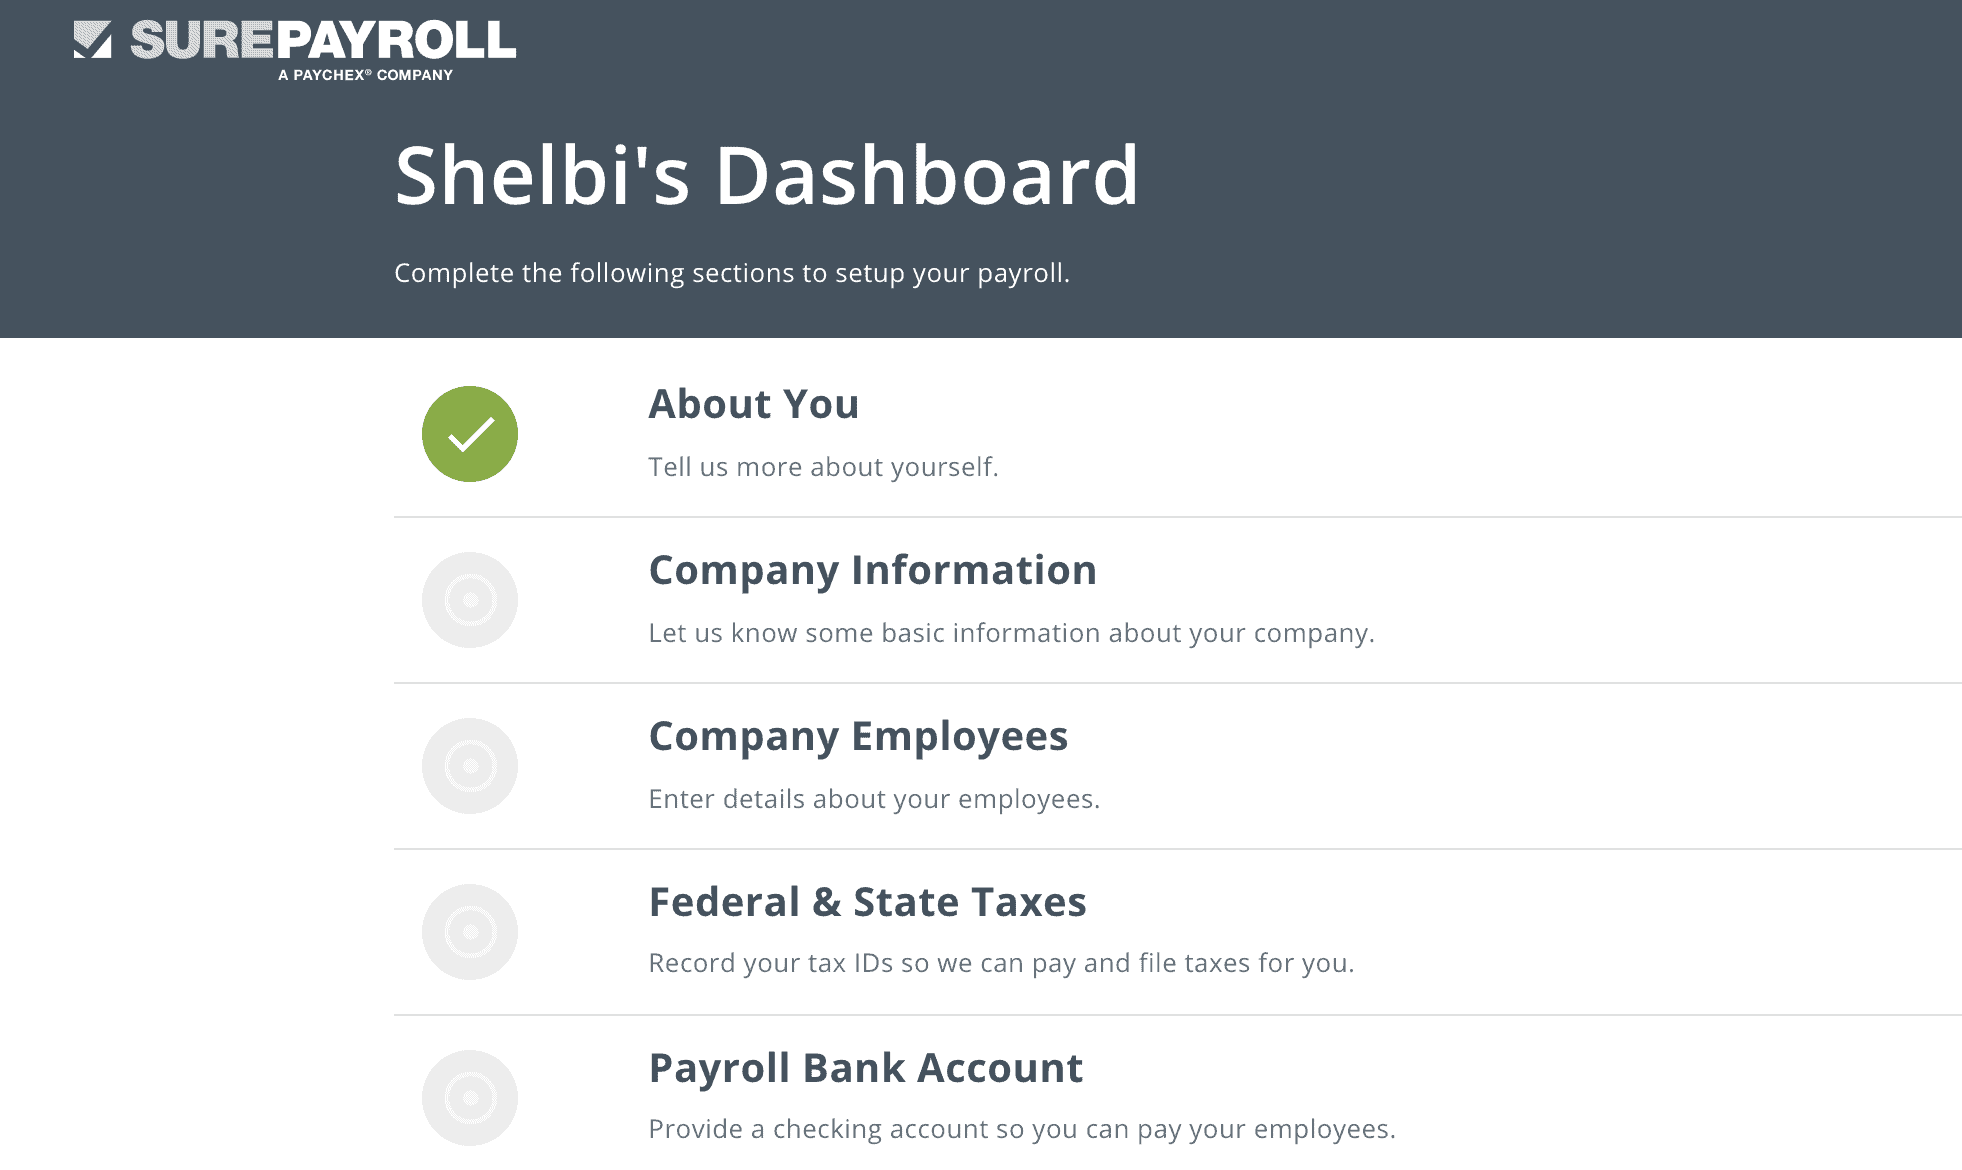 SurePayroll: best payroll software for small businesses with few employees